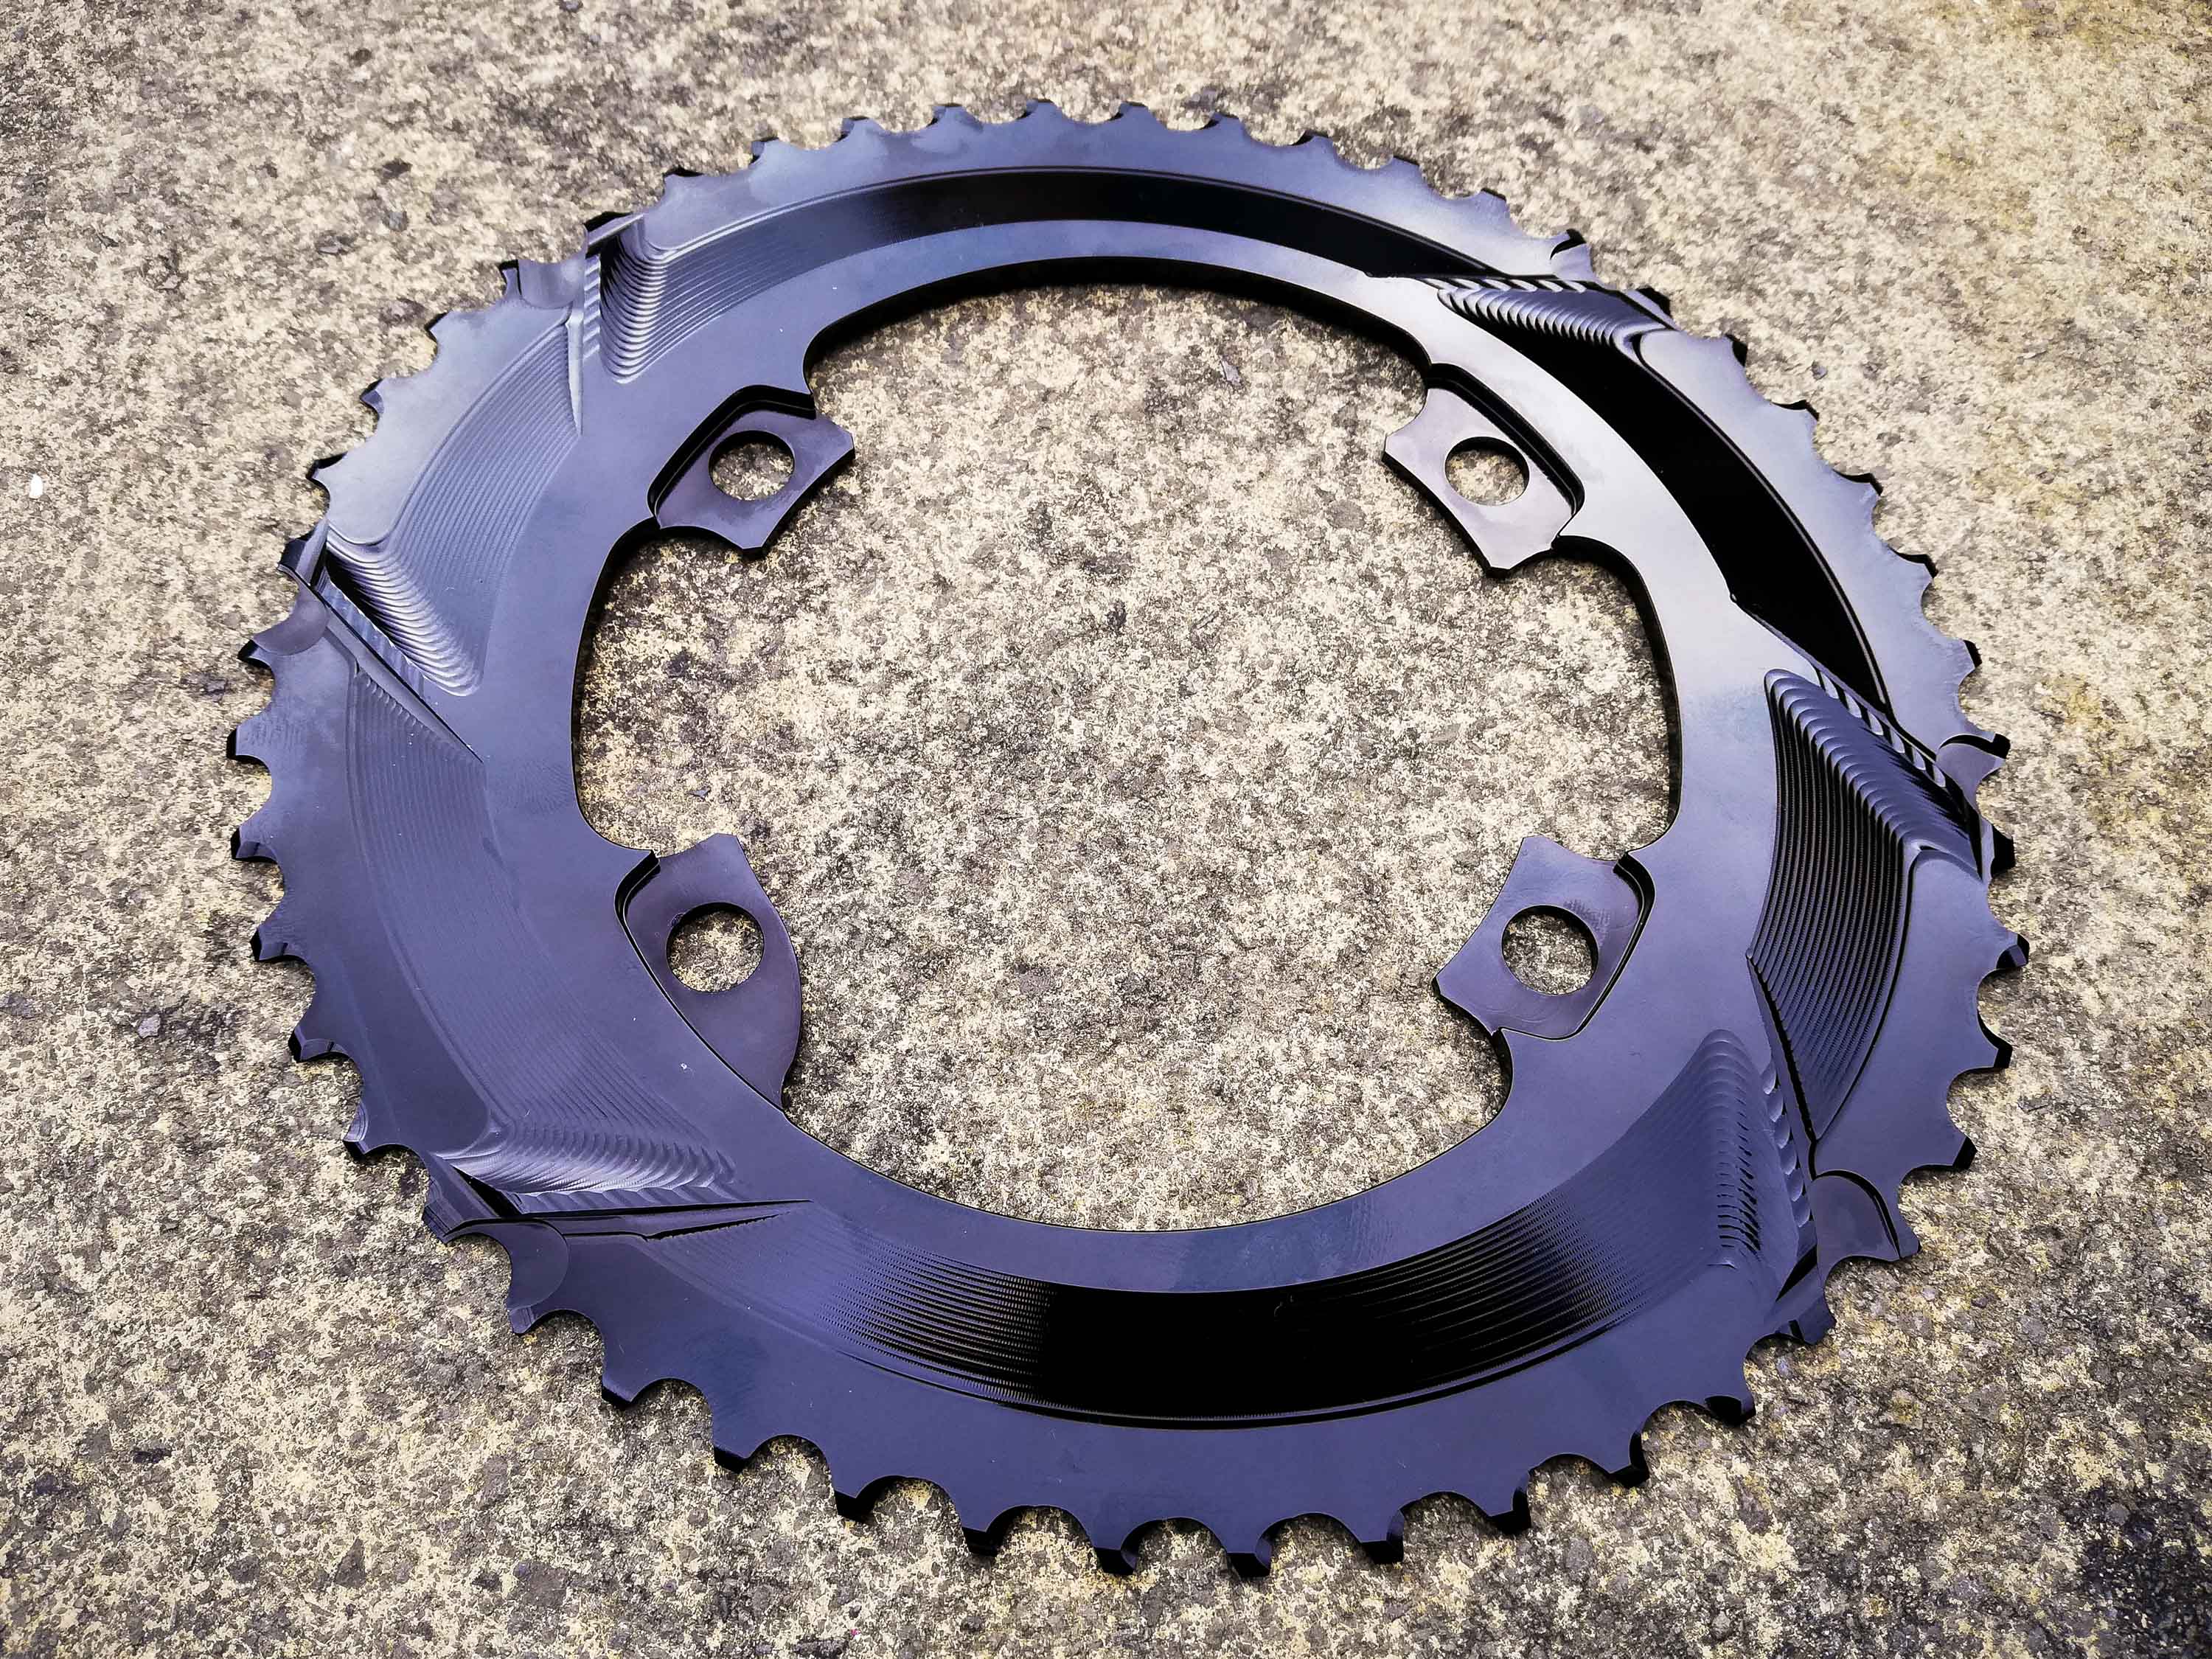 48t absoluteBLACK Premium Sub-Compact Oval 110 BCD Road Outer Chainring 110 B